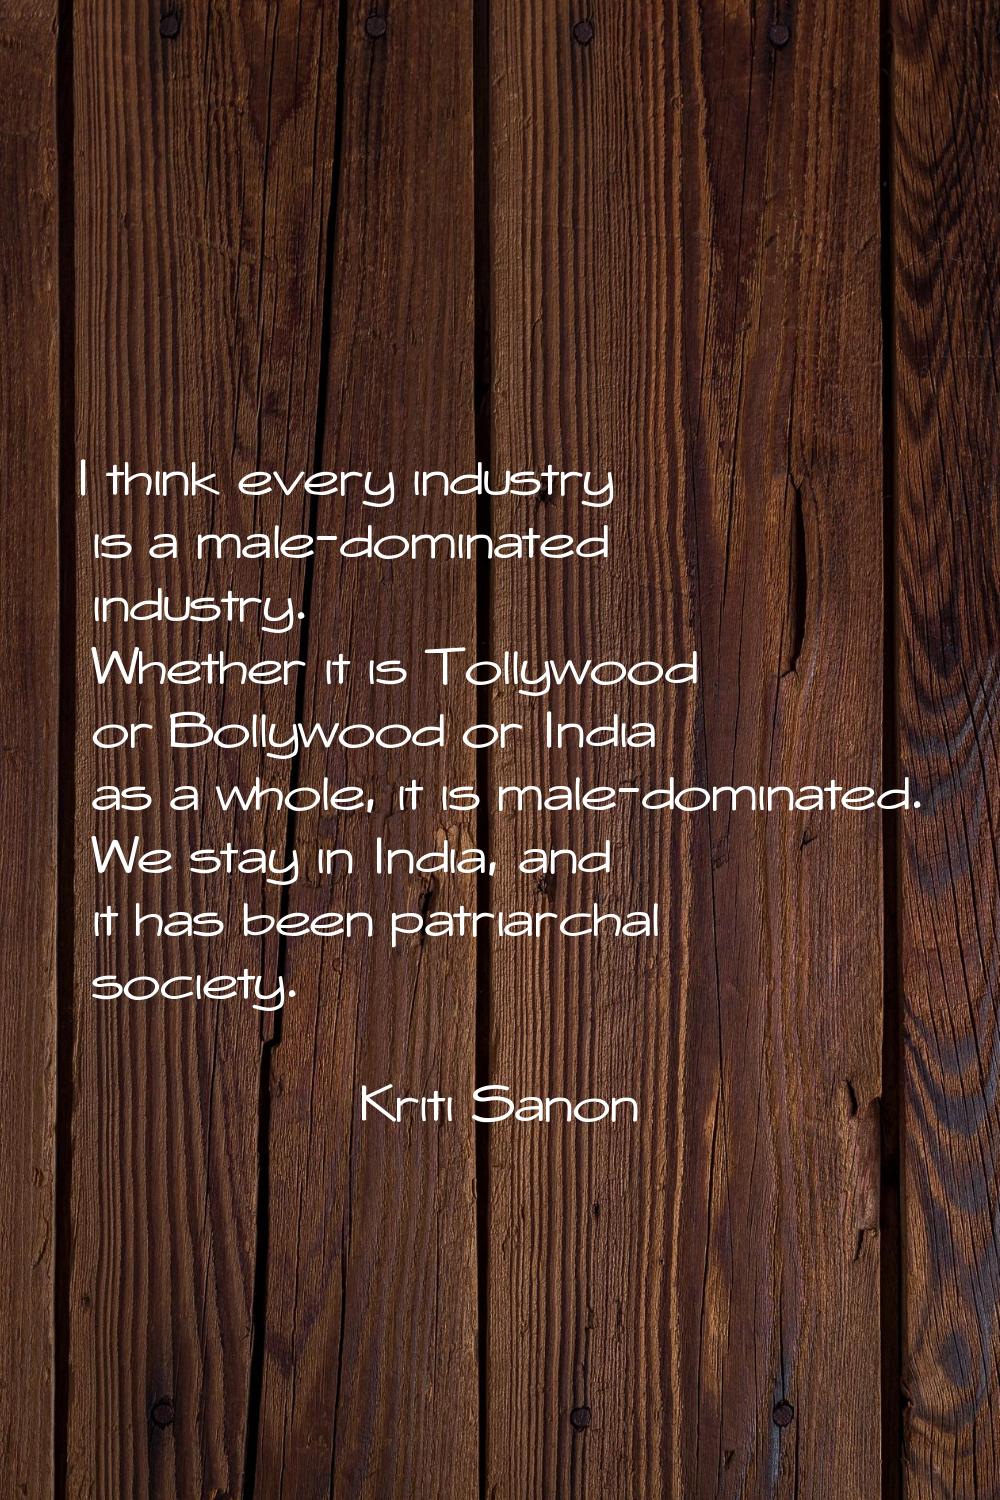 I think every industry is a male-dominated industry. Whether it is Tollywood or Bollywood or India 